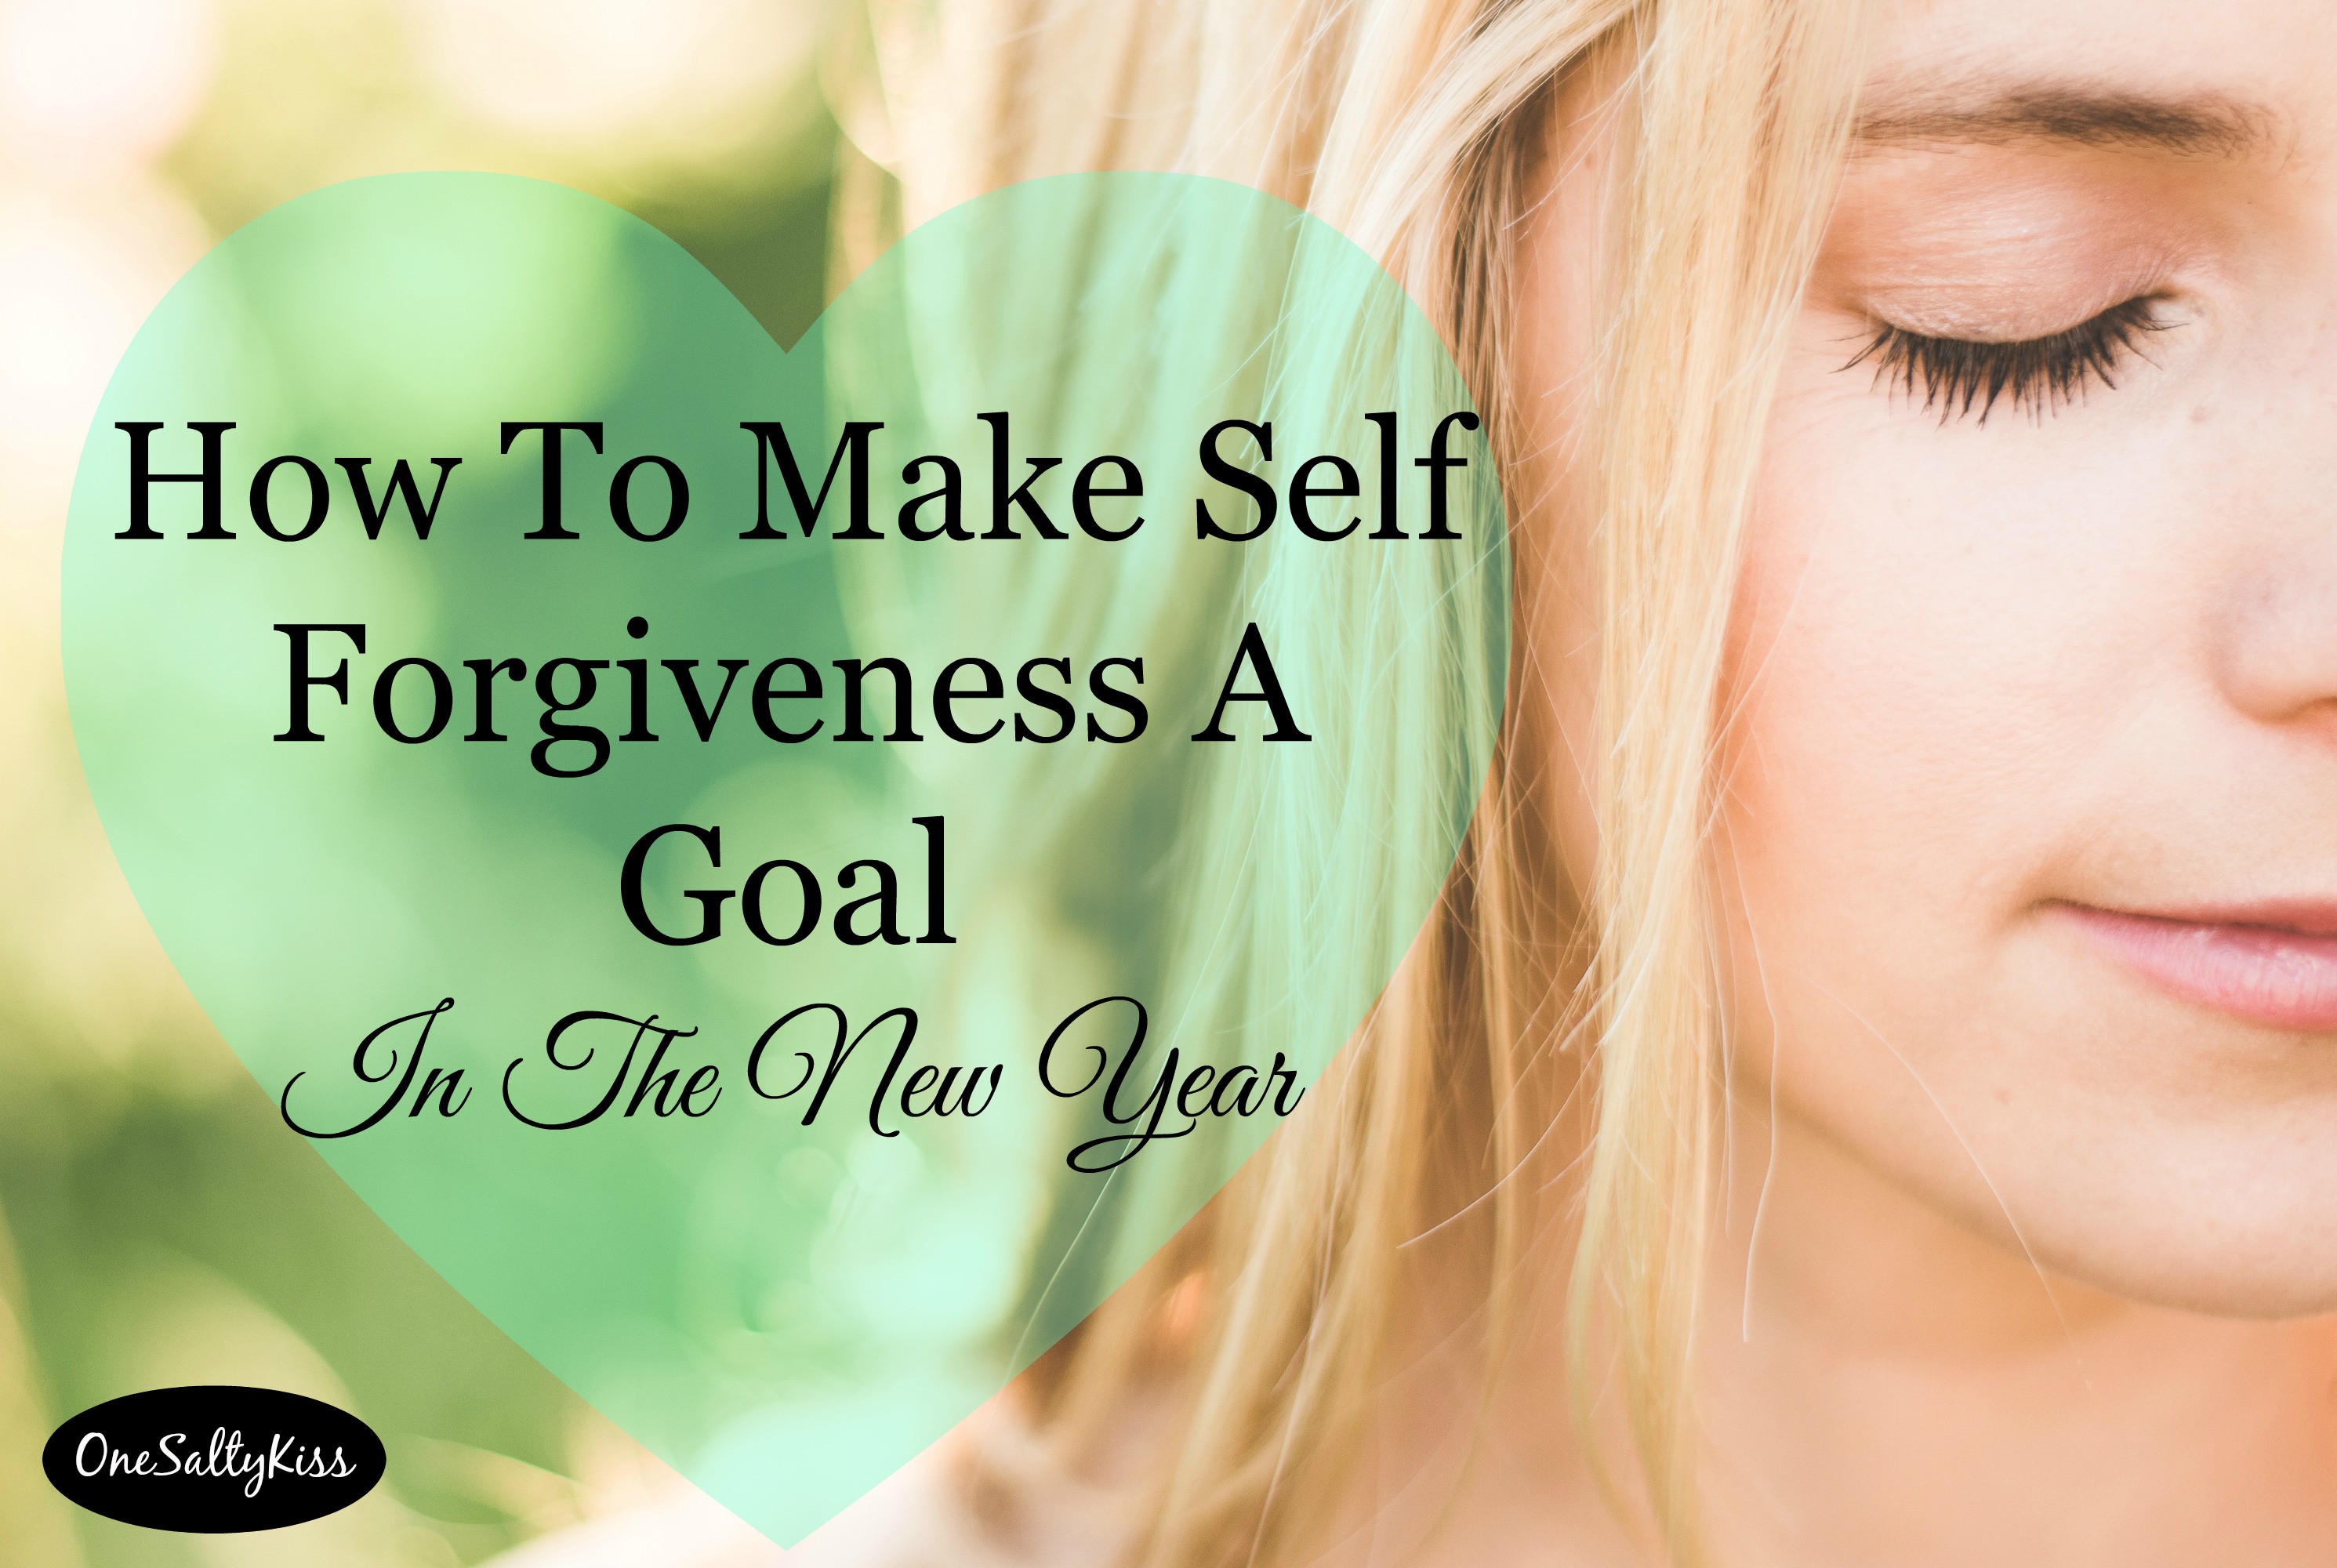 How To Make Self-Forgiveness A Goal In The New Year